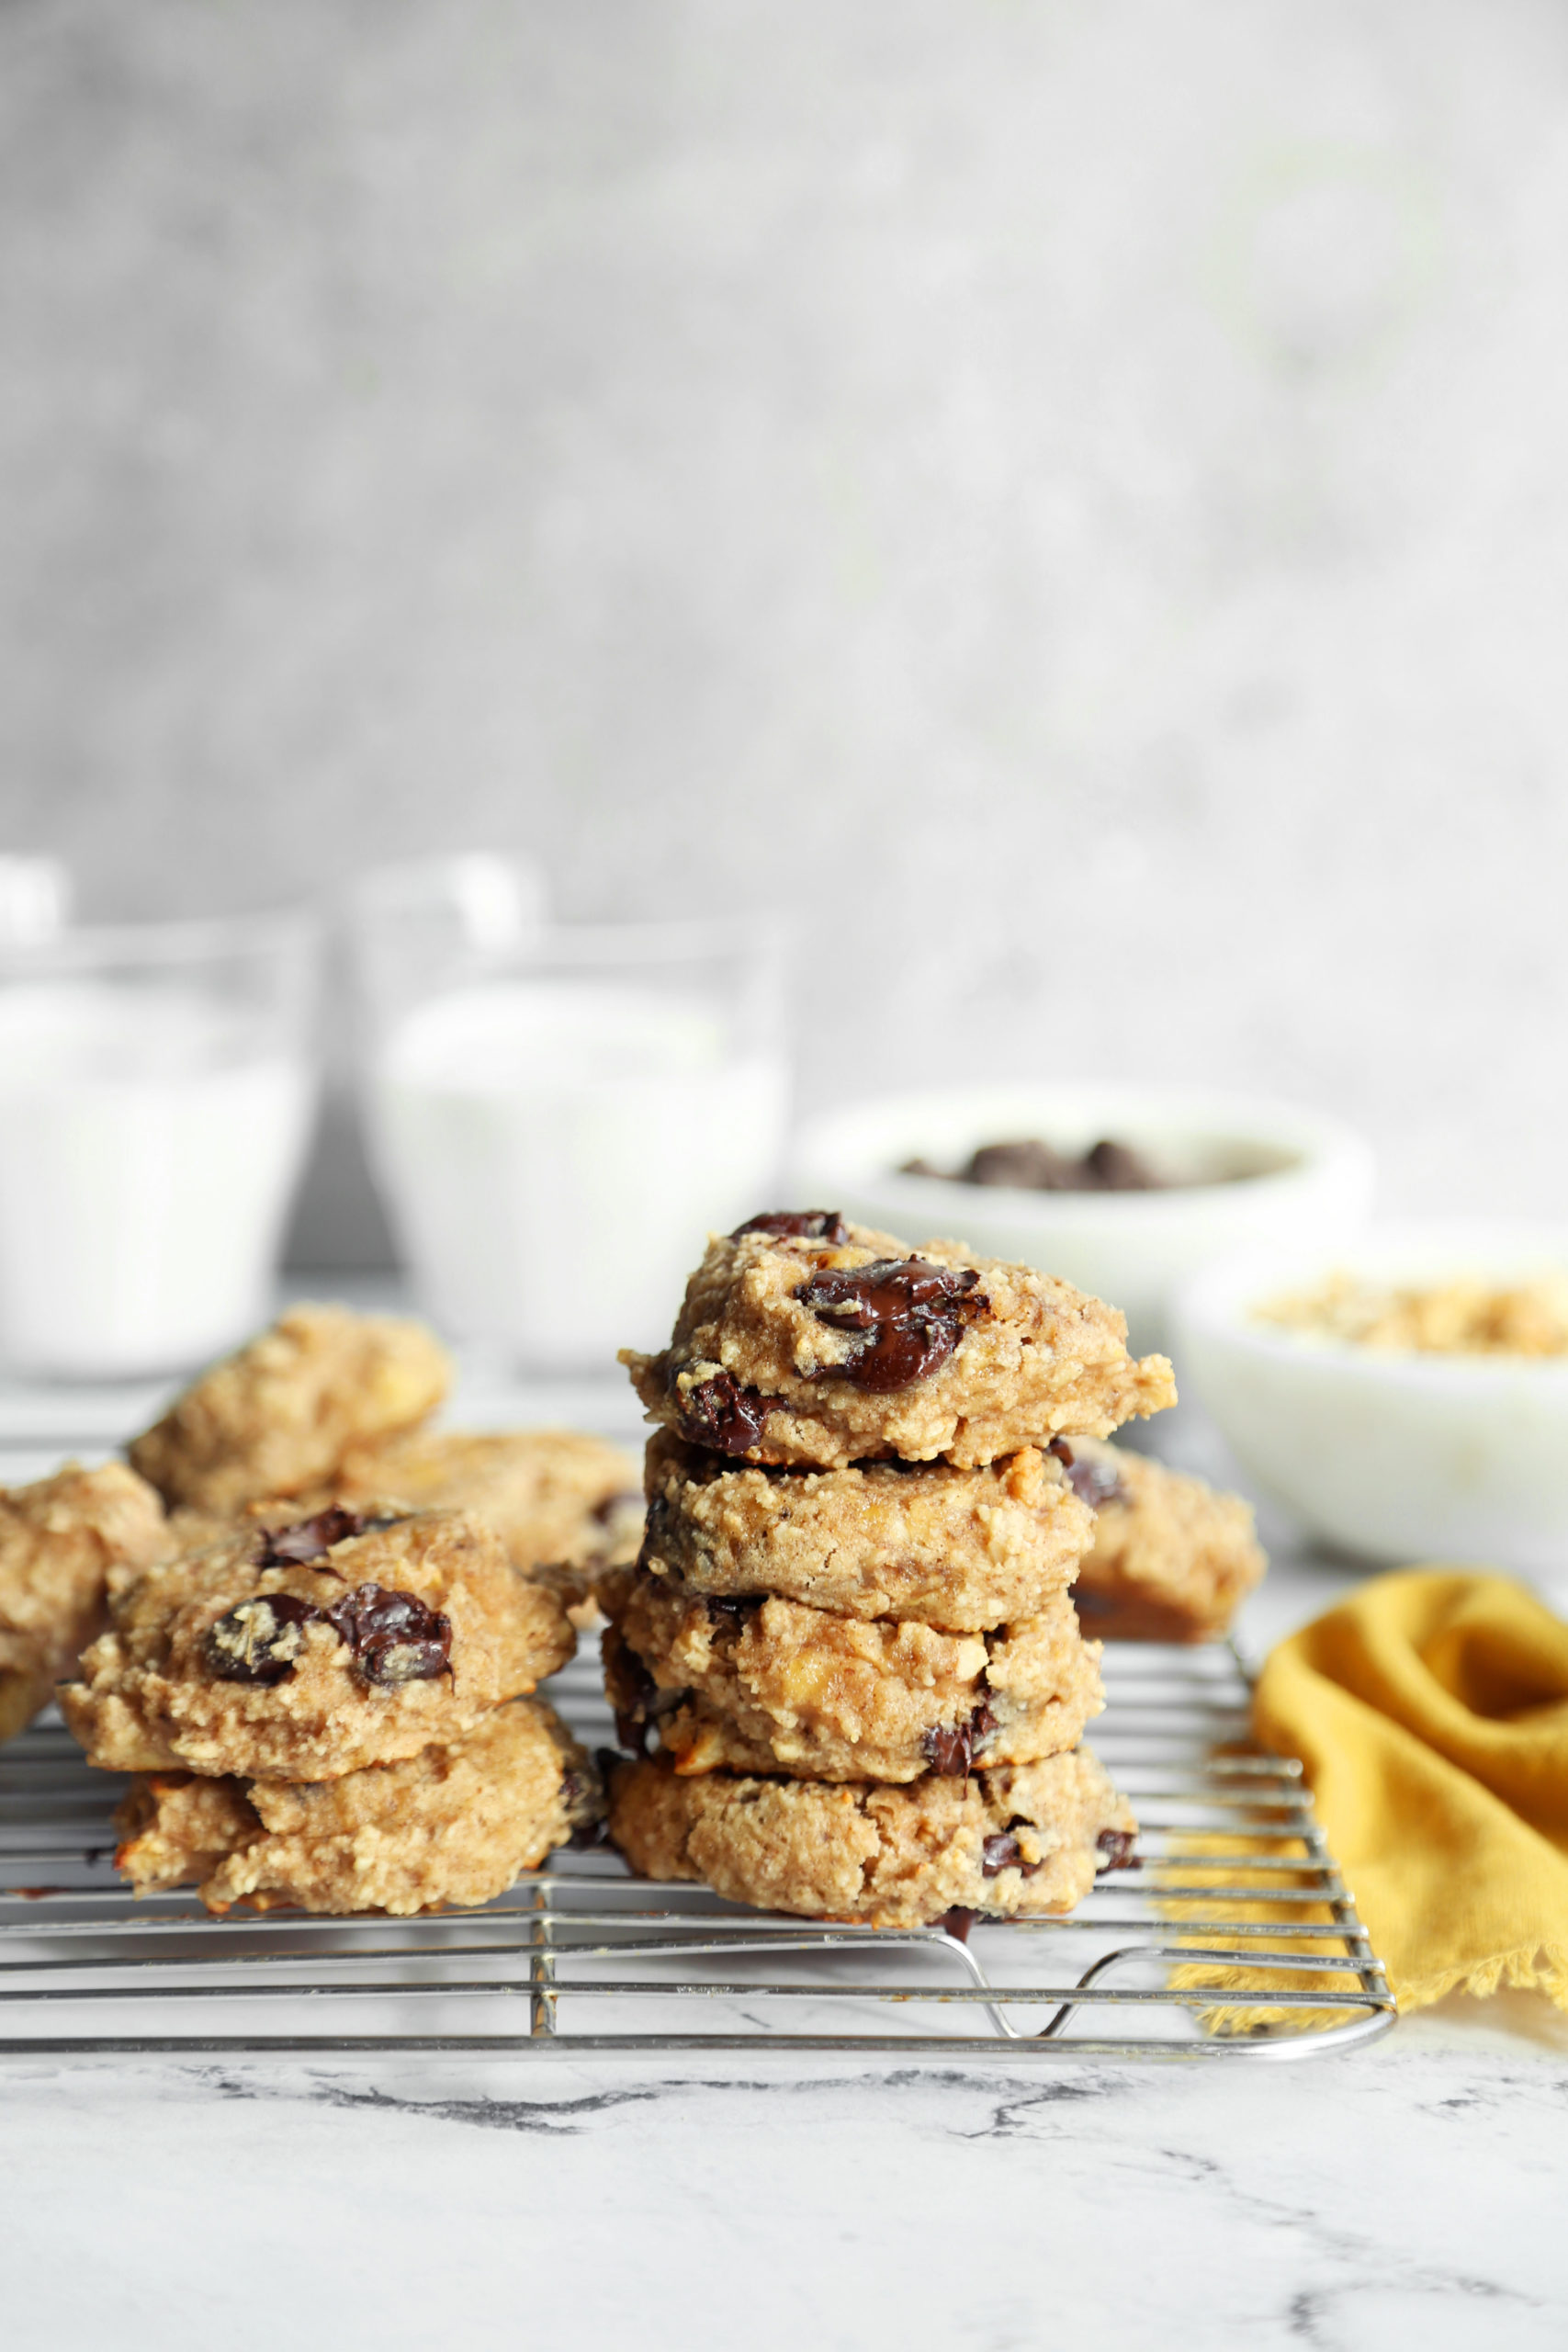 No Nut Chocolate Chip Natural Cookies - The RUN-A-TON Group